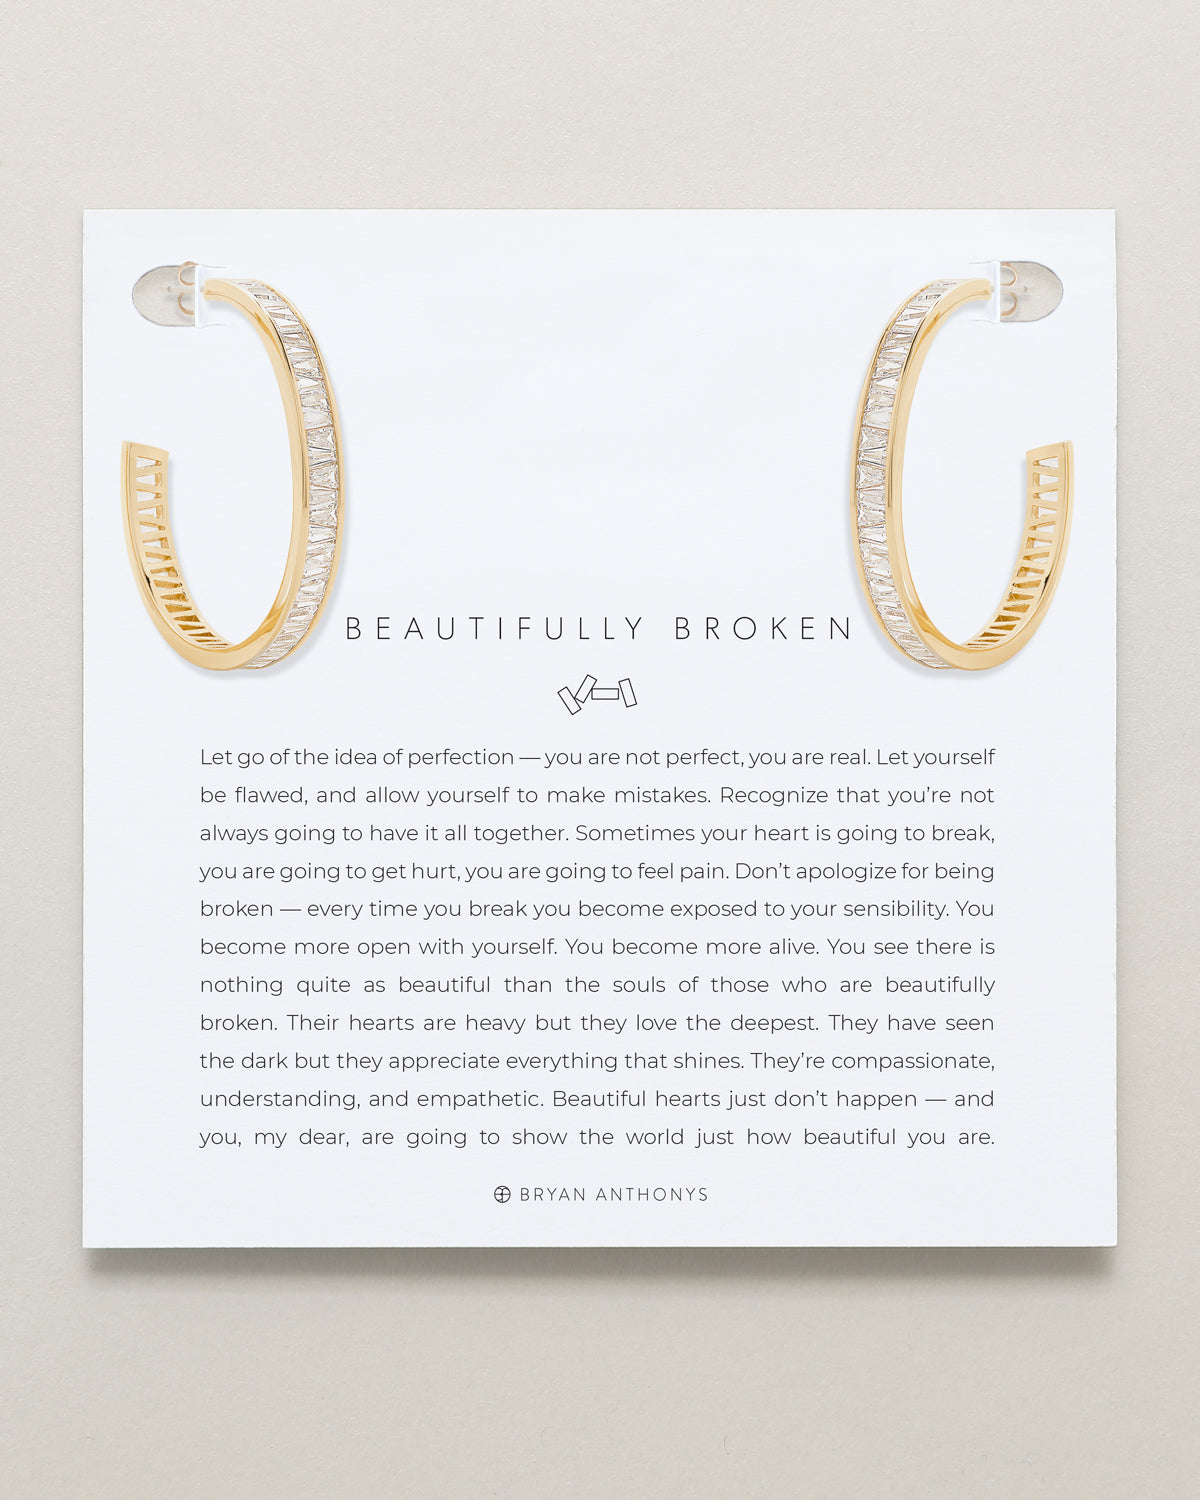 Bryan Anthonys Beautifully Broken Collection Baguette Maxi Hoop Earrings Gold On Card